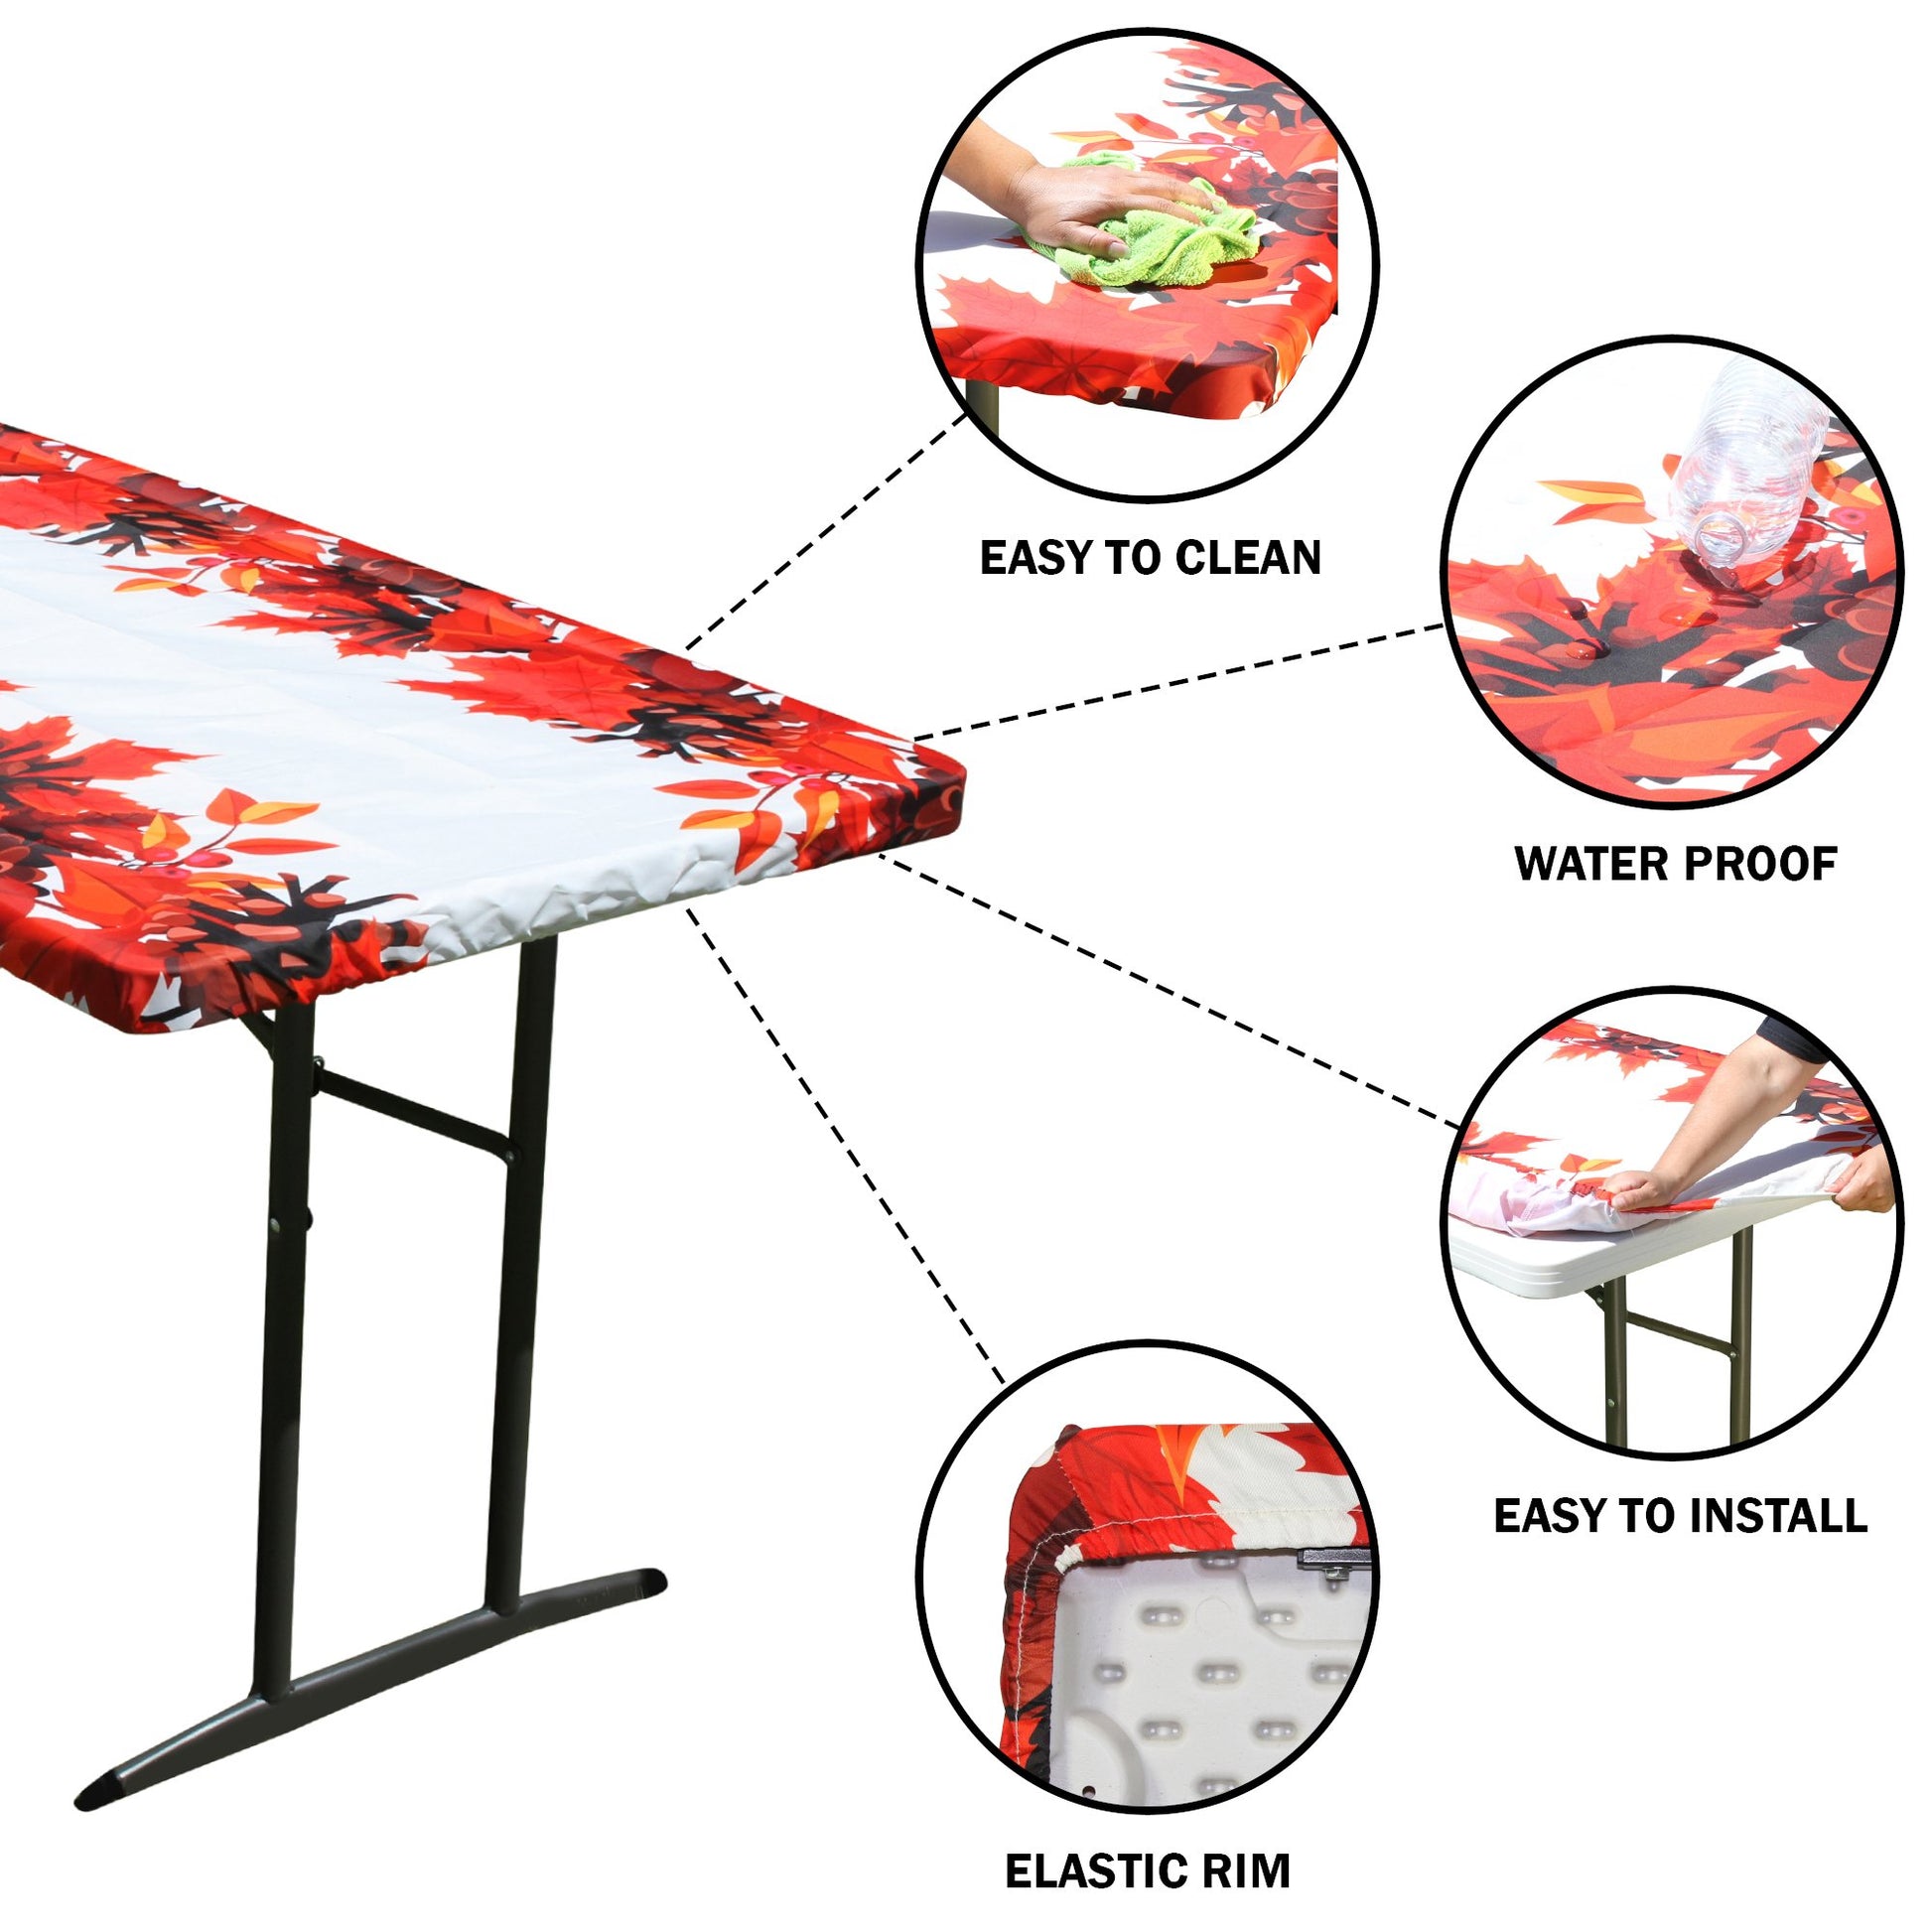 TableCloth PLUS 72" Fall Fitted Polyester Tablecloth for 6' Folding Tables is easy to clean, water proof, easy to install, and has an elastic rim